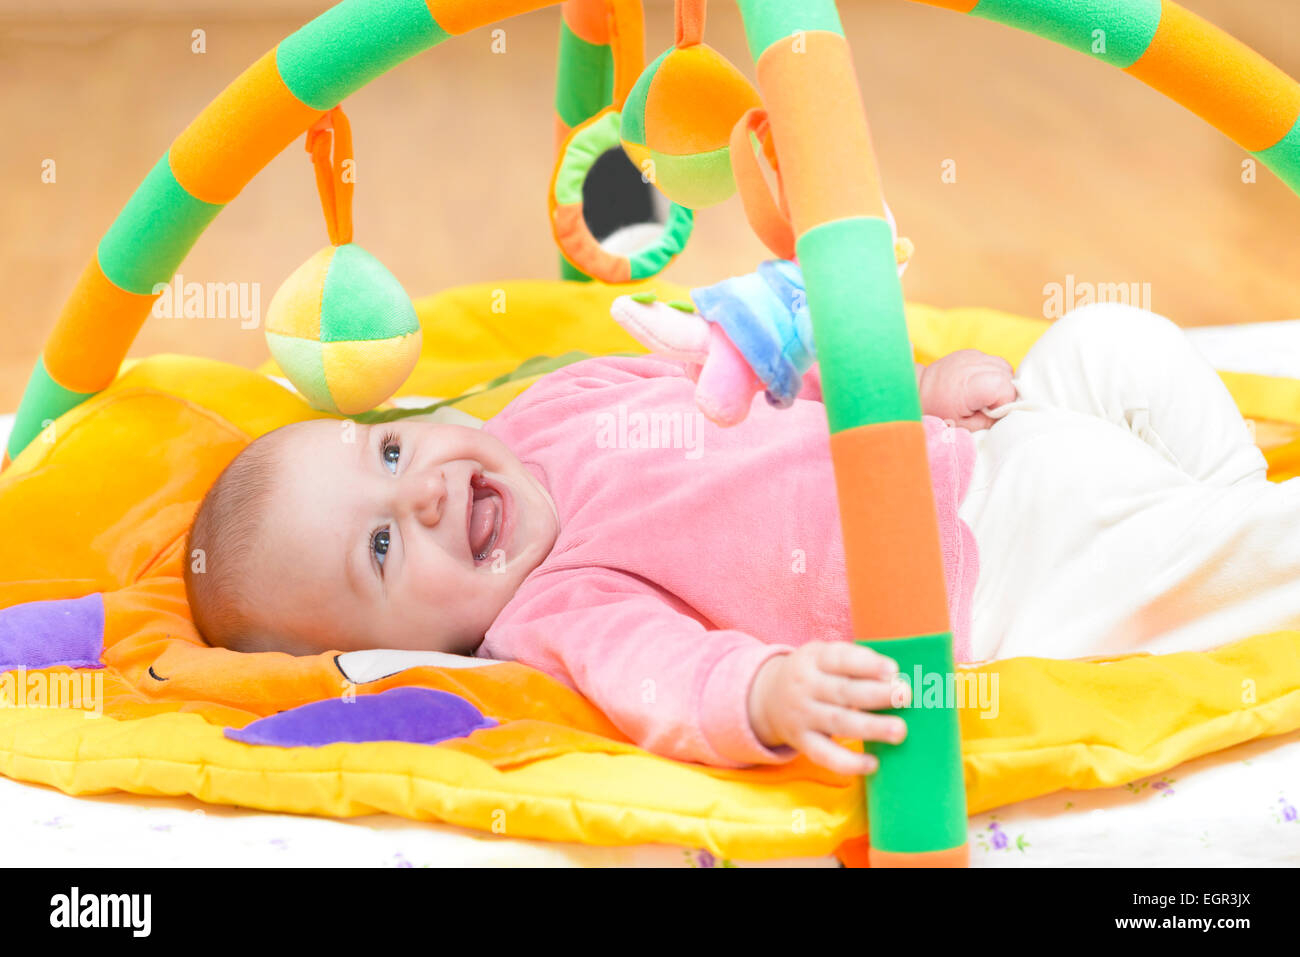 Innocent baby smiling and playing with toys Stock Photo